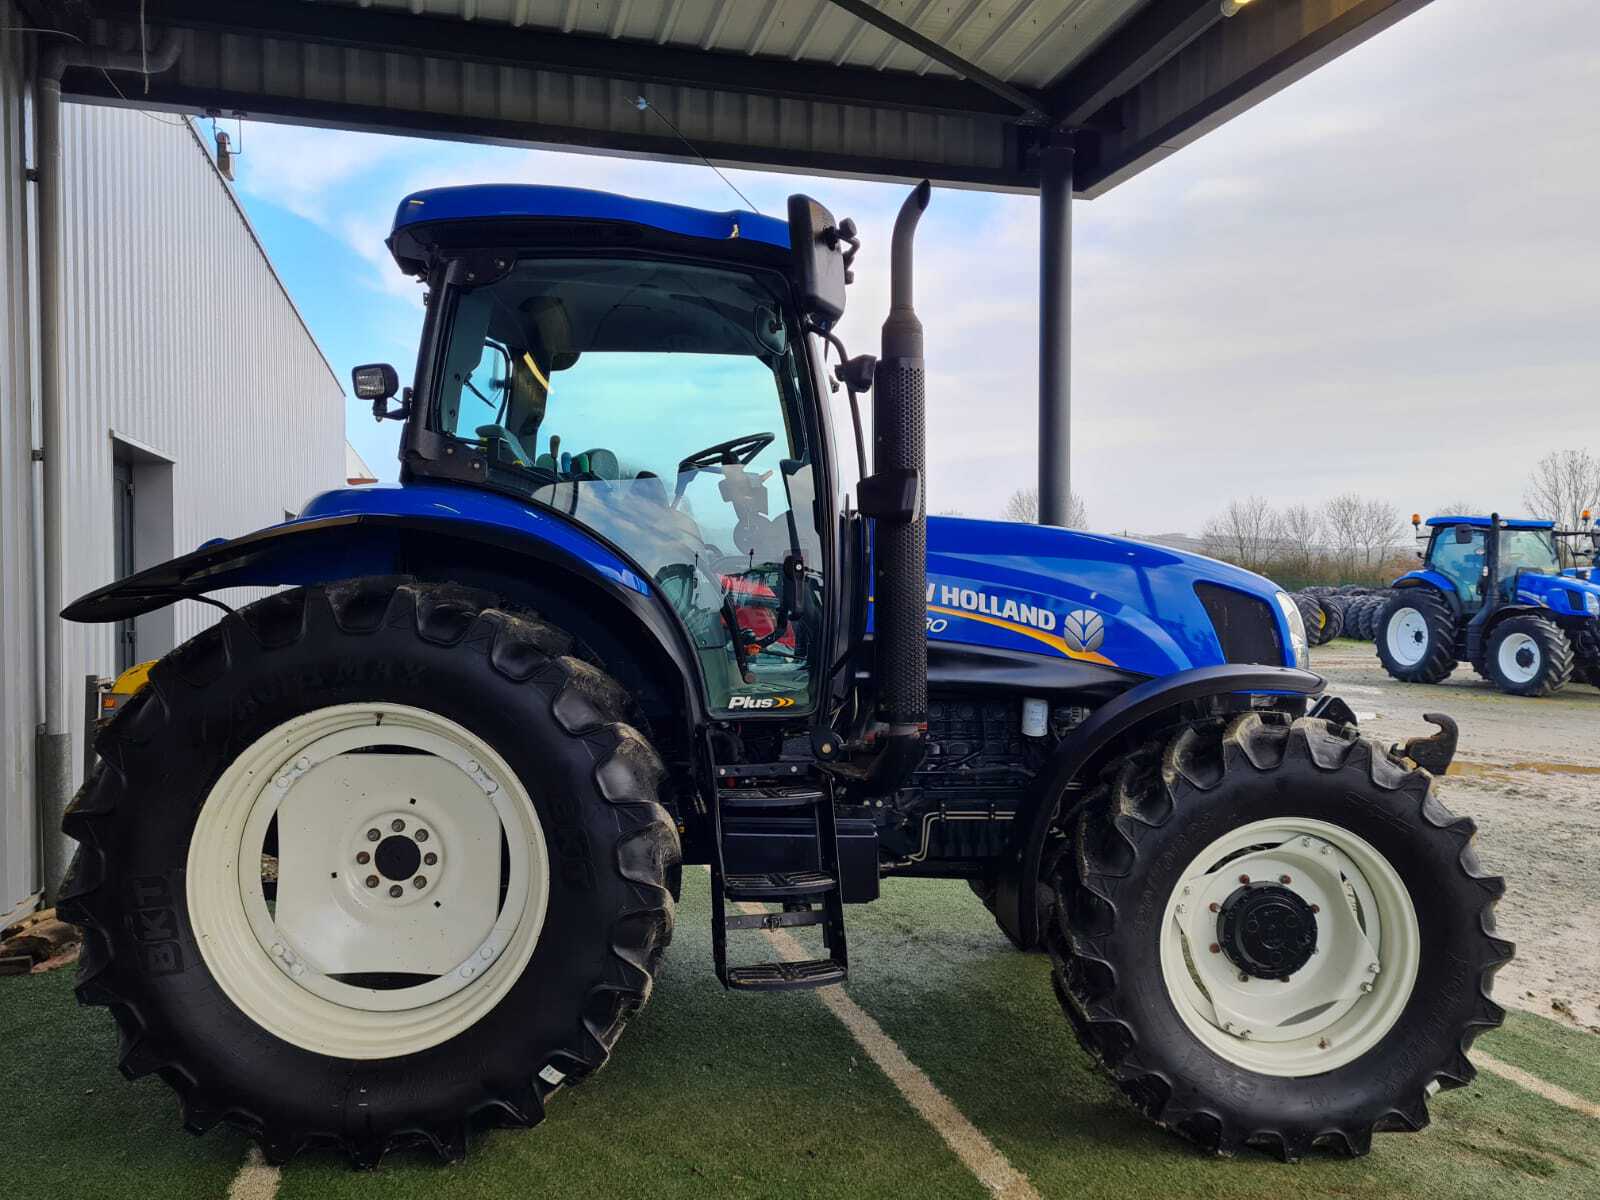 NEW HOLLAND T6030 PLUS